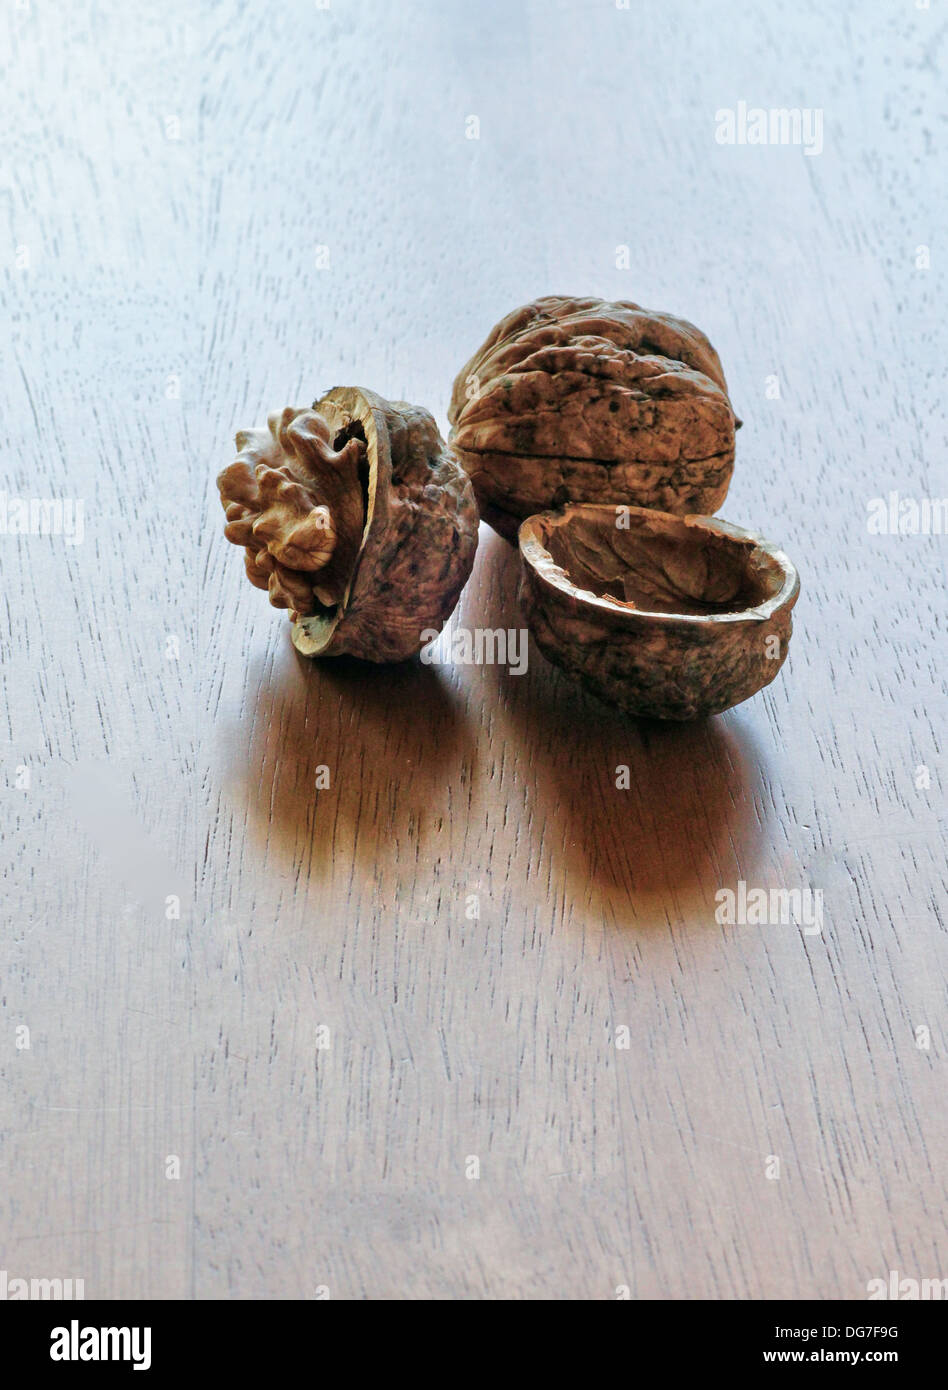 Vertical format of still life study of Wall nuts on coffee table with soft focus background. Stock Photo